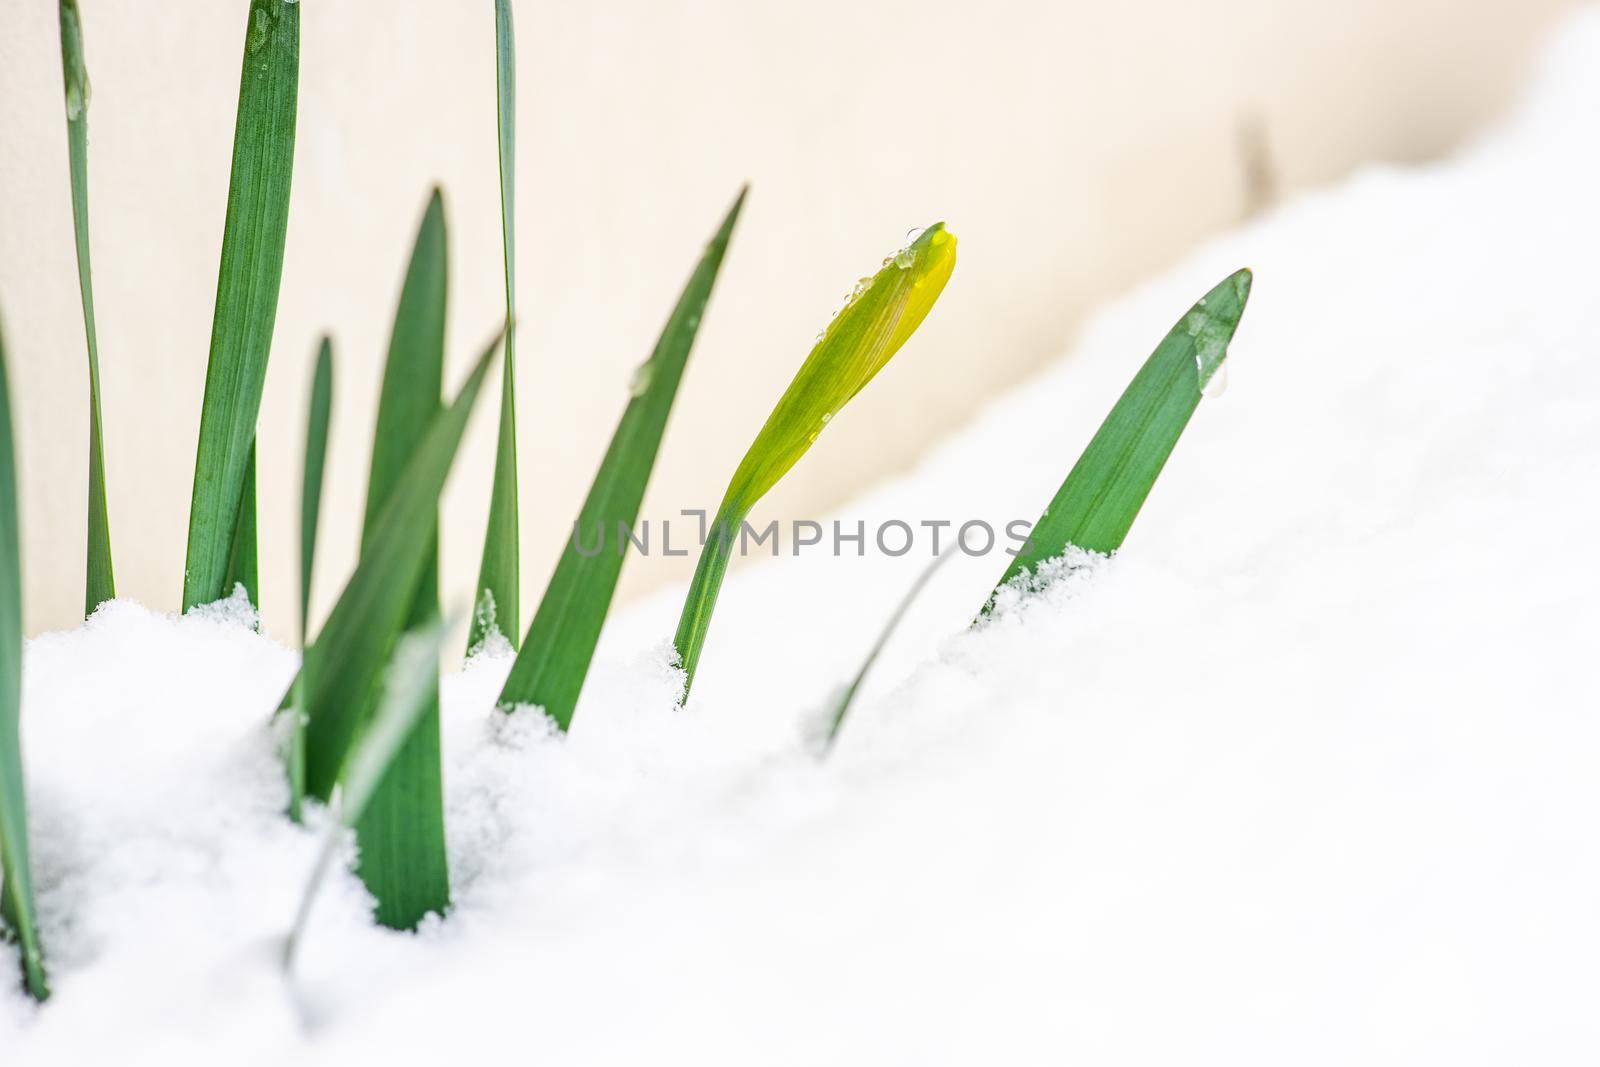 Plants in the garden under the snow by Elet